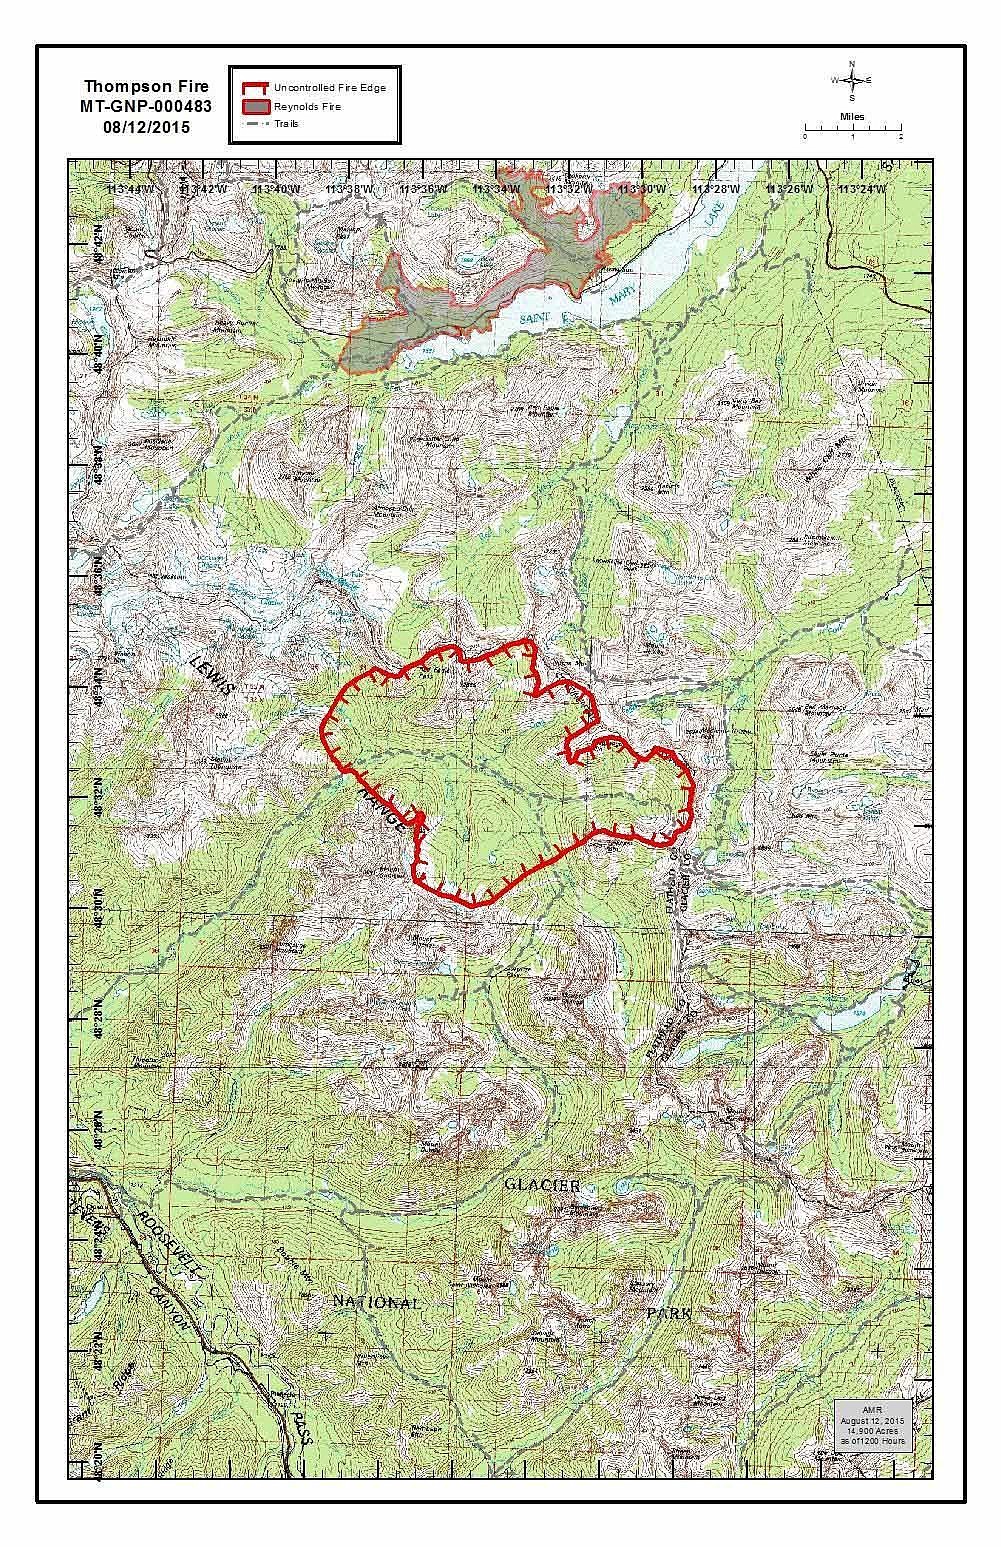 &lt;p&gt;This map shows the area burned by the Thompson Fire in Glacier National Park. As of Aug. 12, the fire had burned 14,900 acres.&lt;/p&gt;